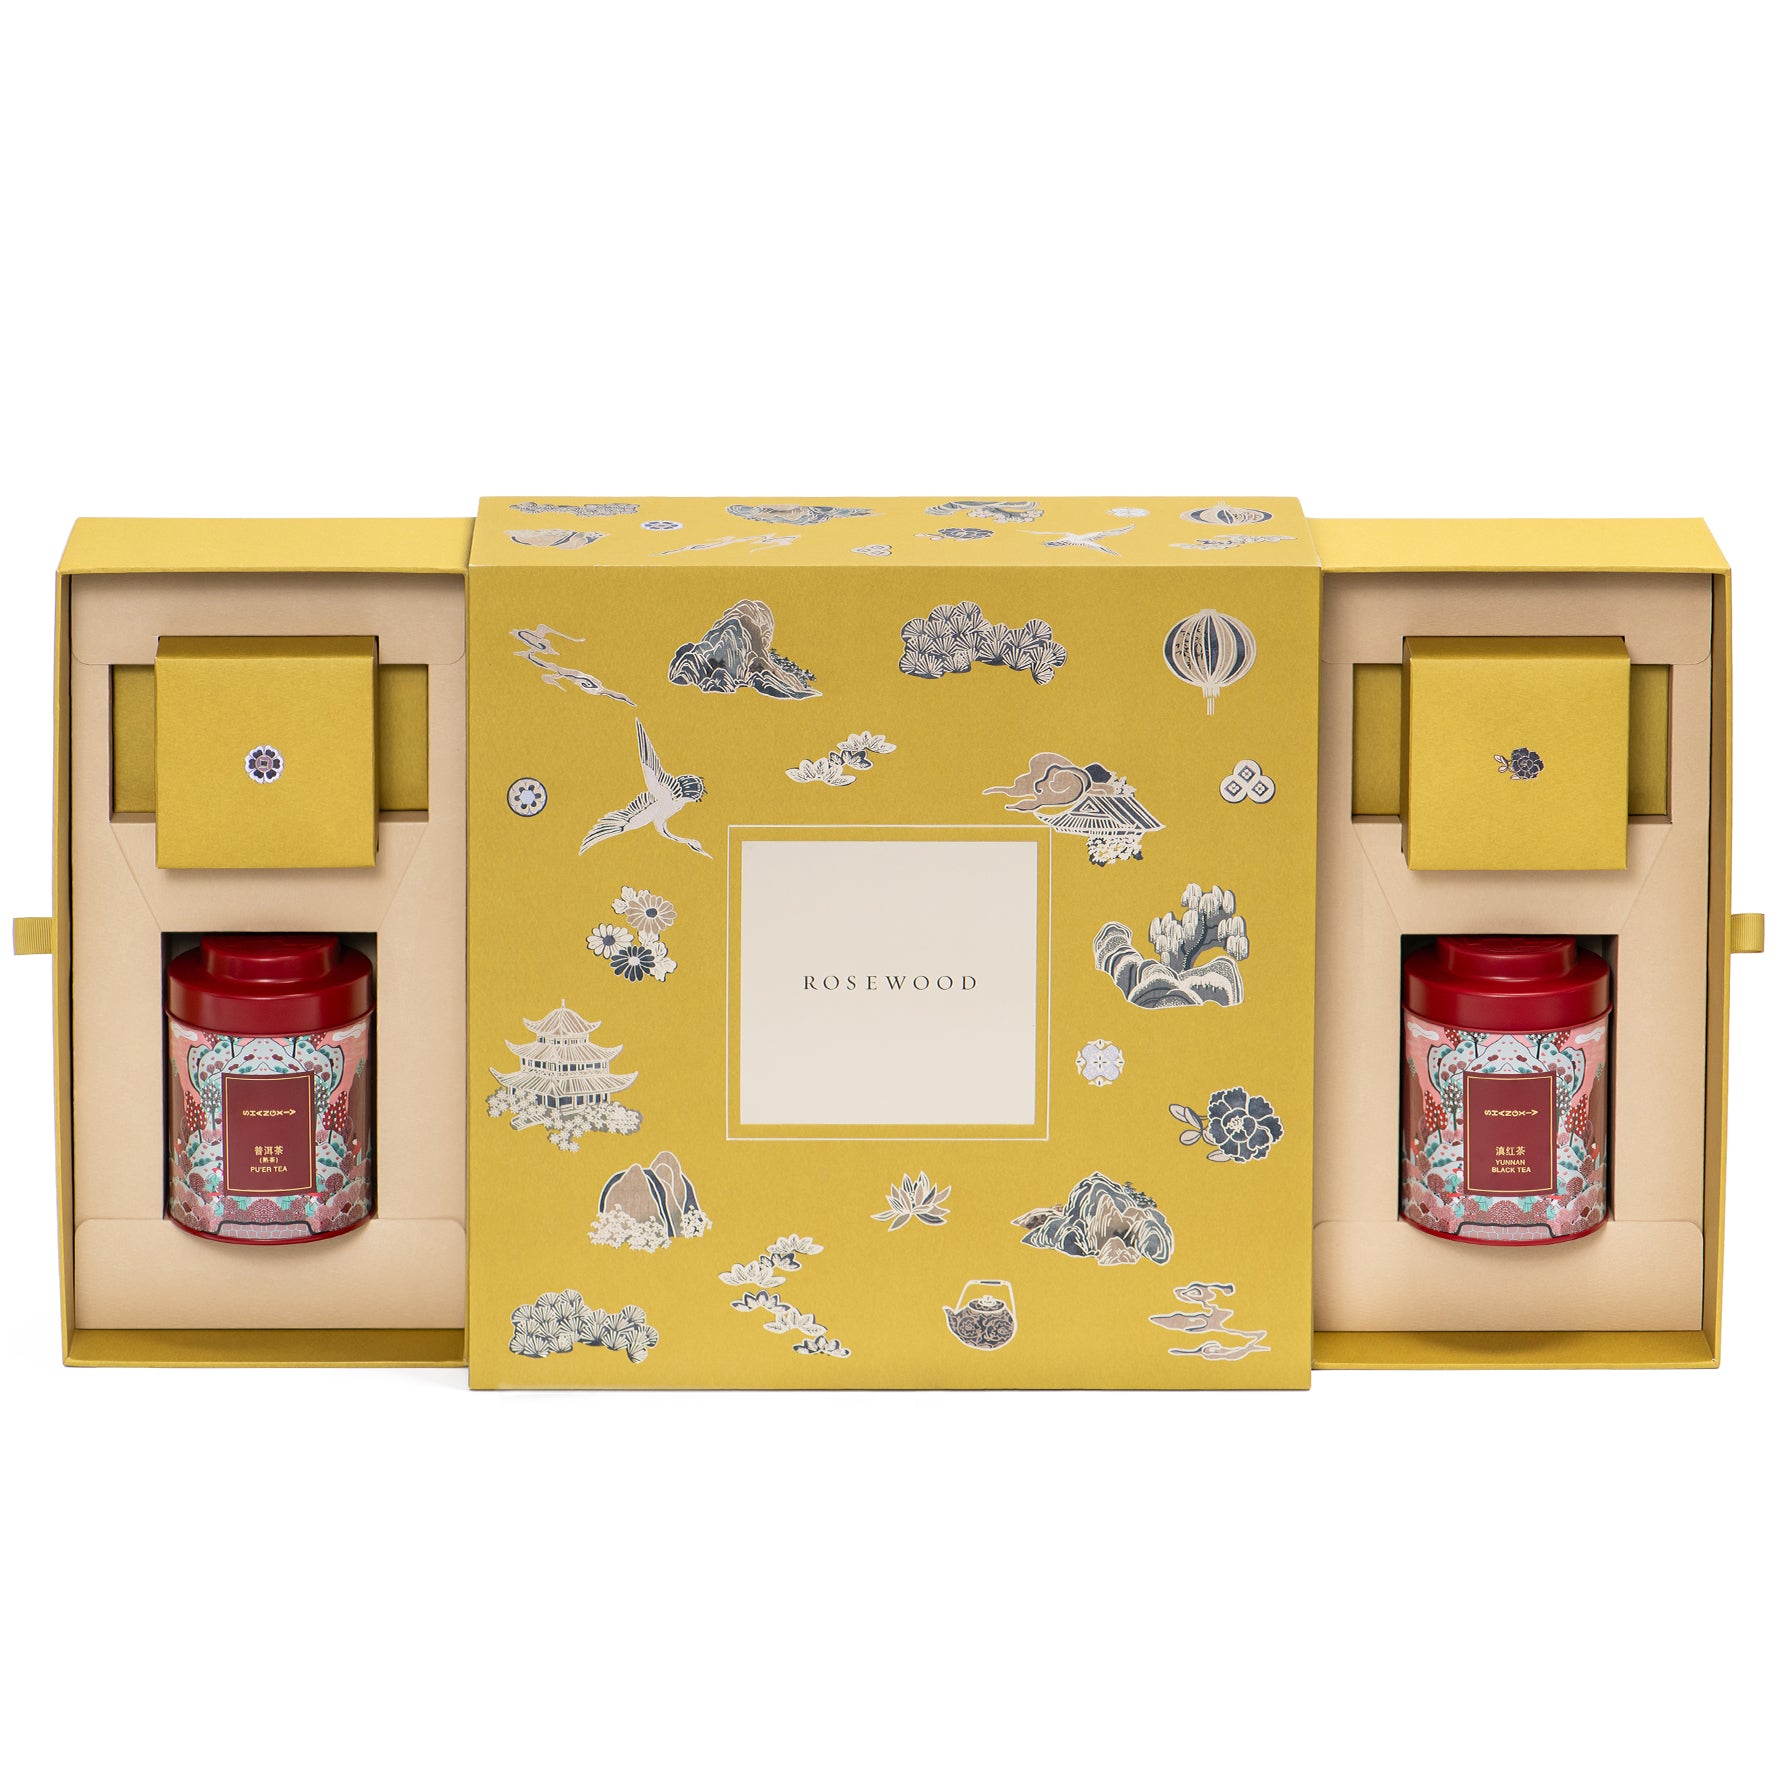 'The Rosewood Treasure' Mooncake Gift Box Limited Edition